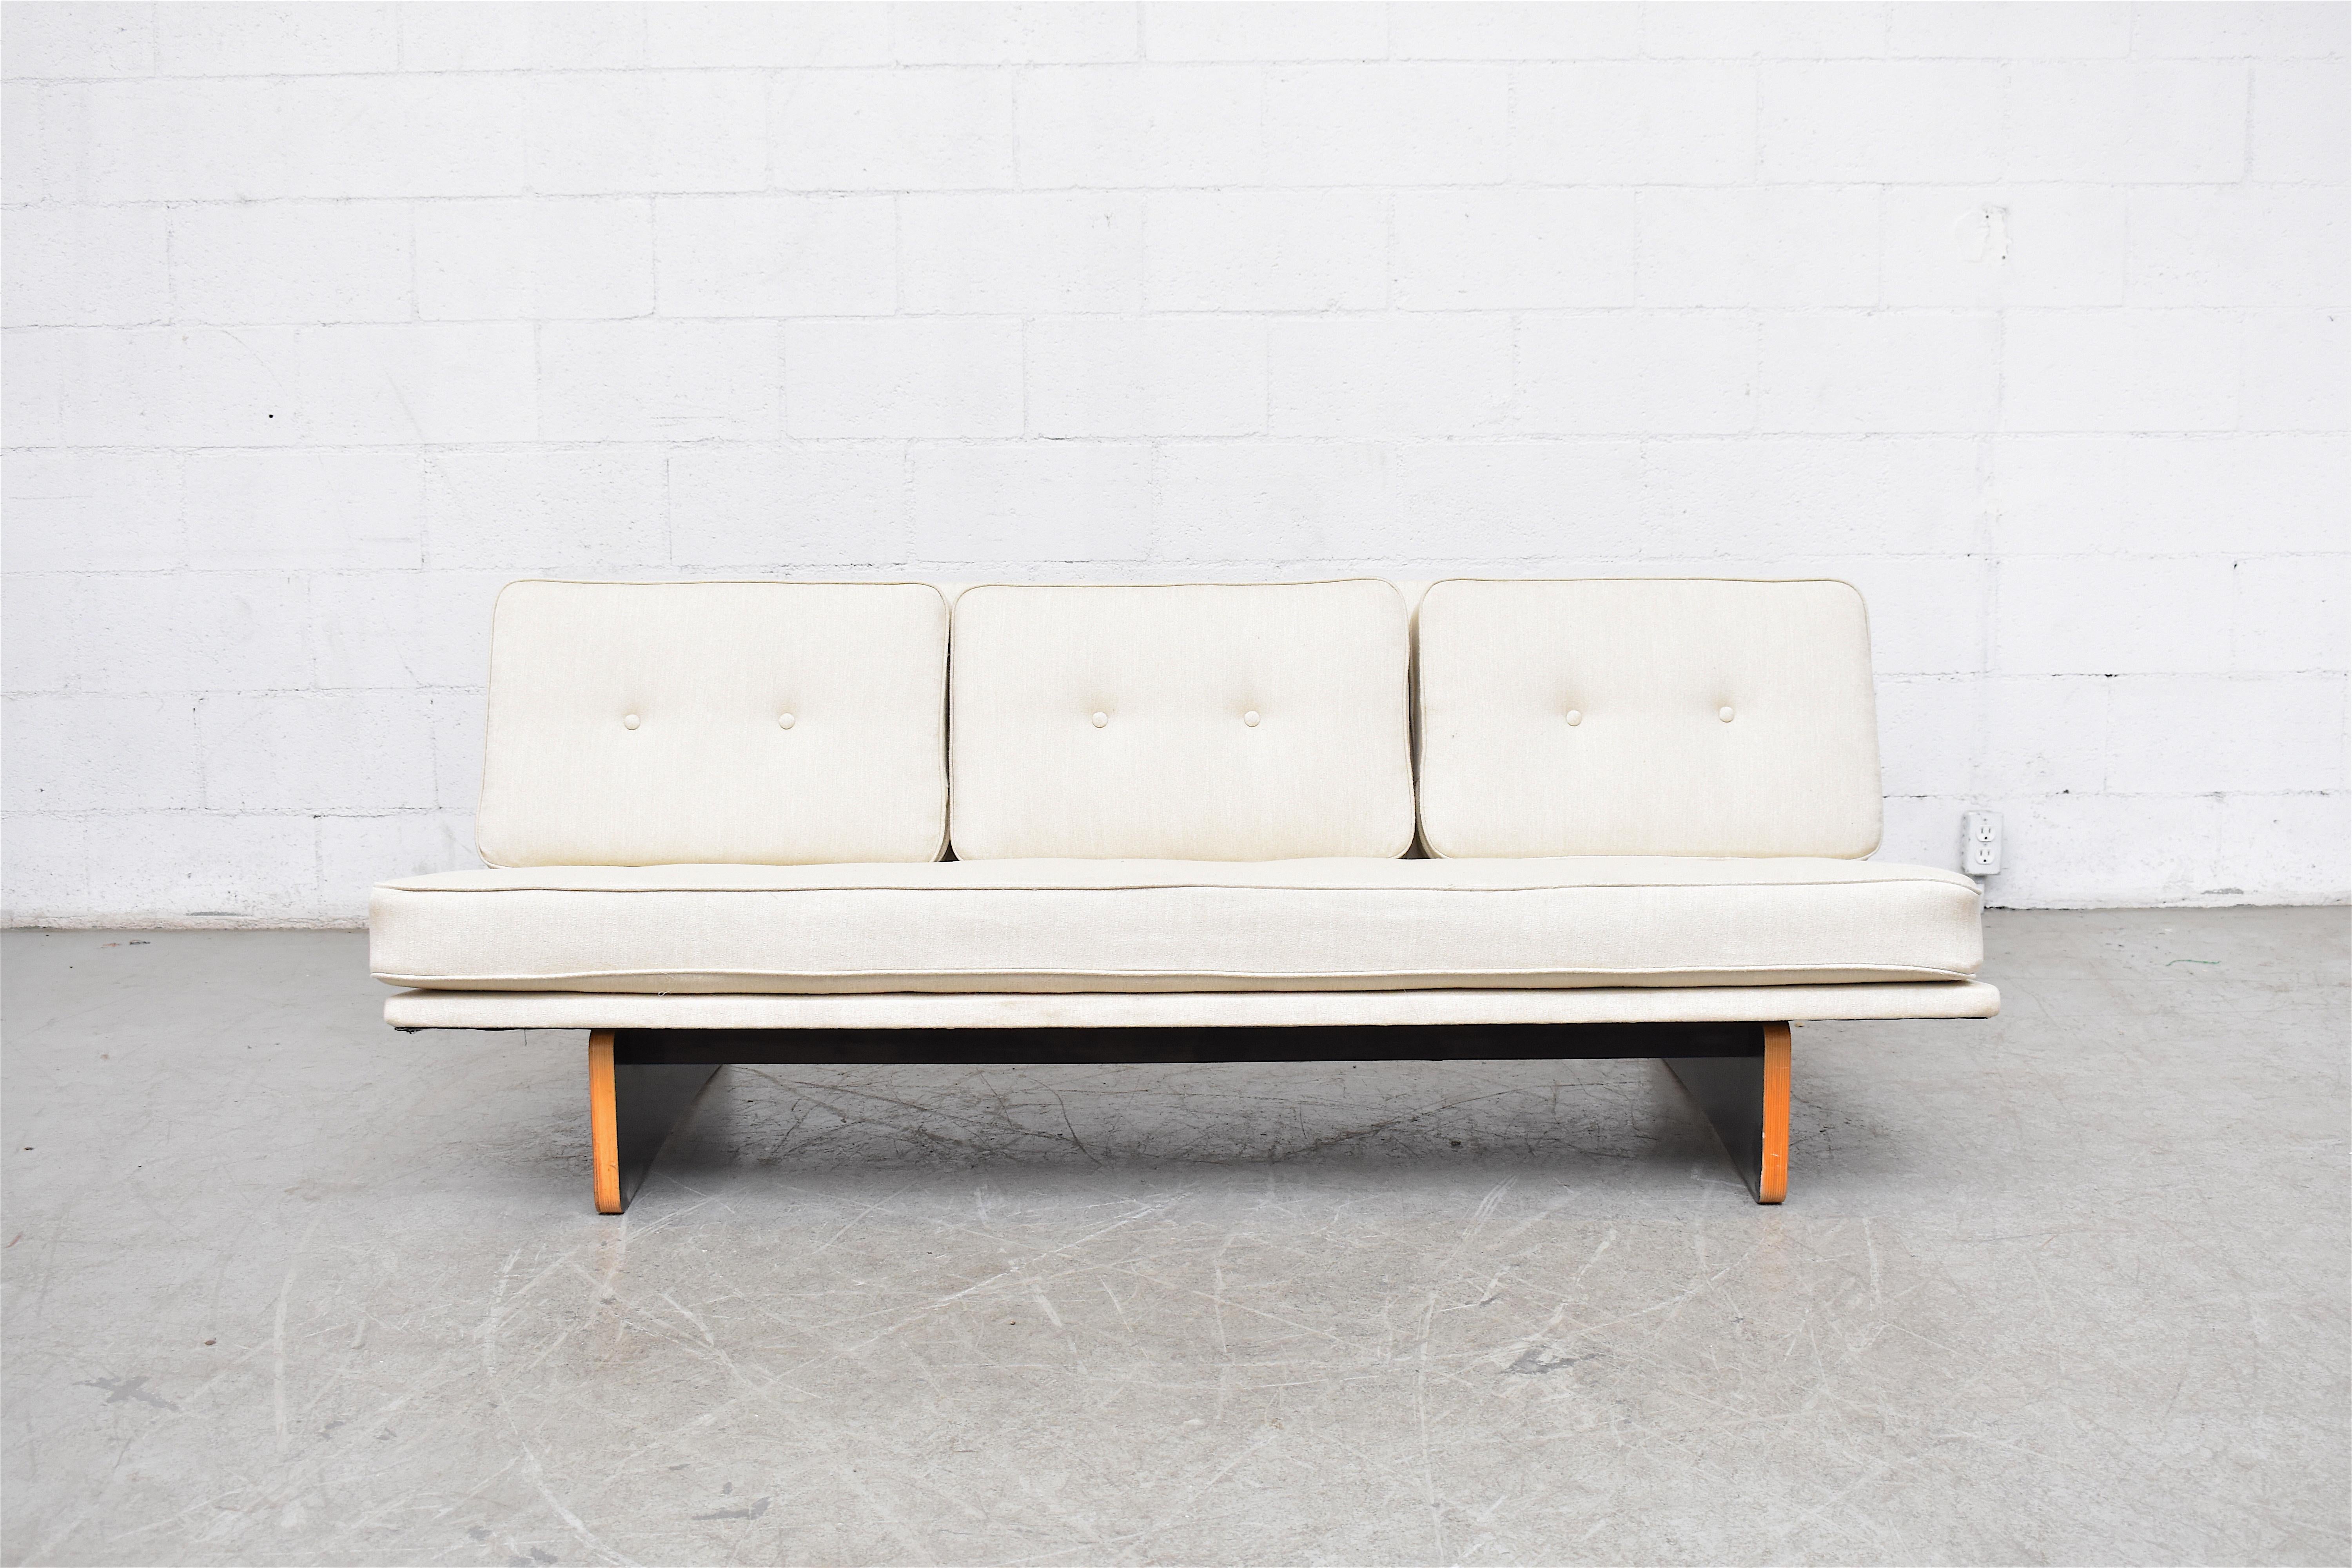 Newly re-upholstered white three-seat Kho Liang Ie sofa with rare black laminated plywood base. Base is original and shows light scratching to black laminate and wood consistent with age and use.